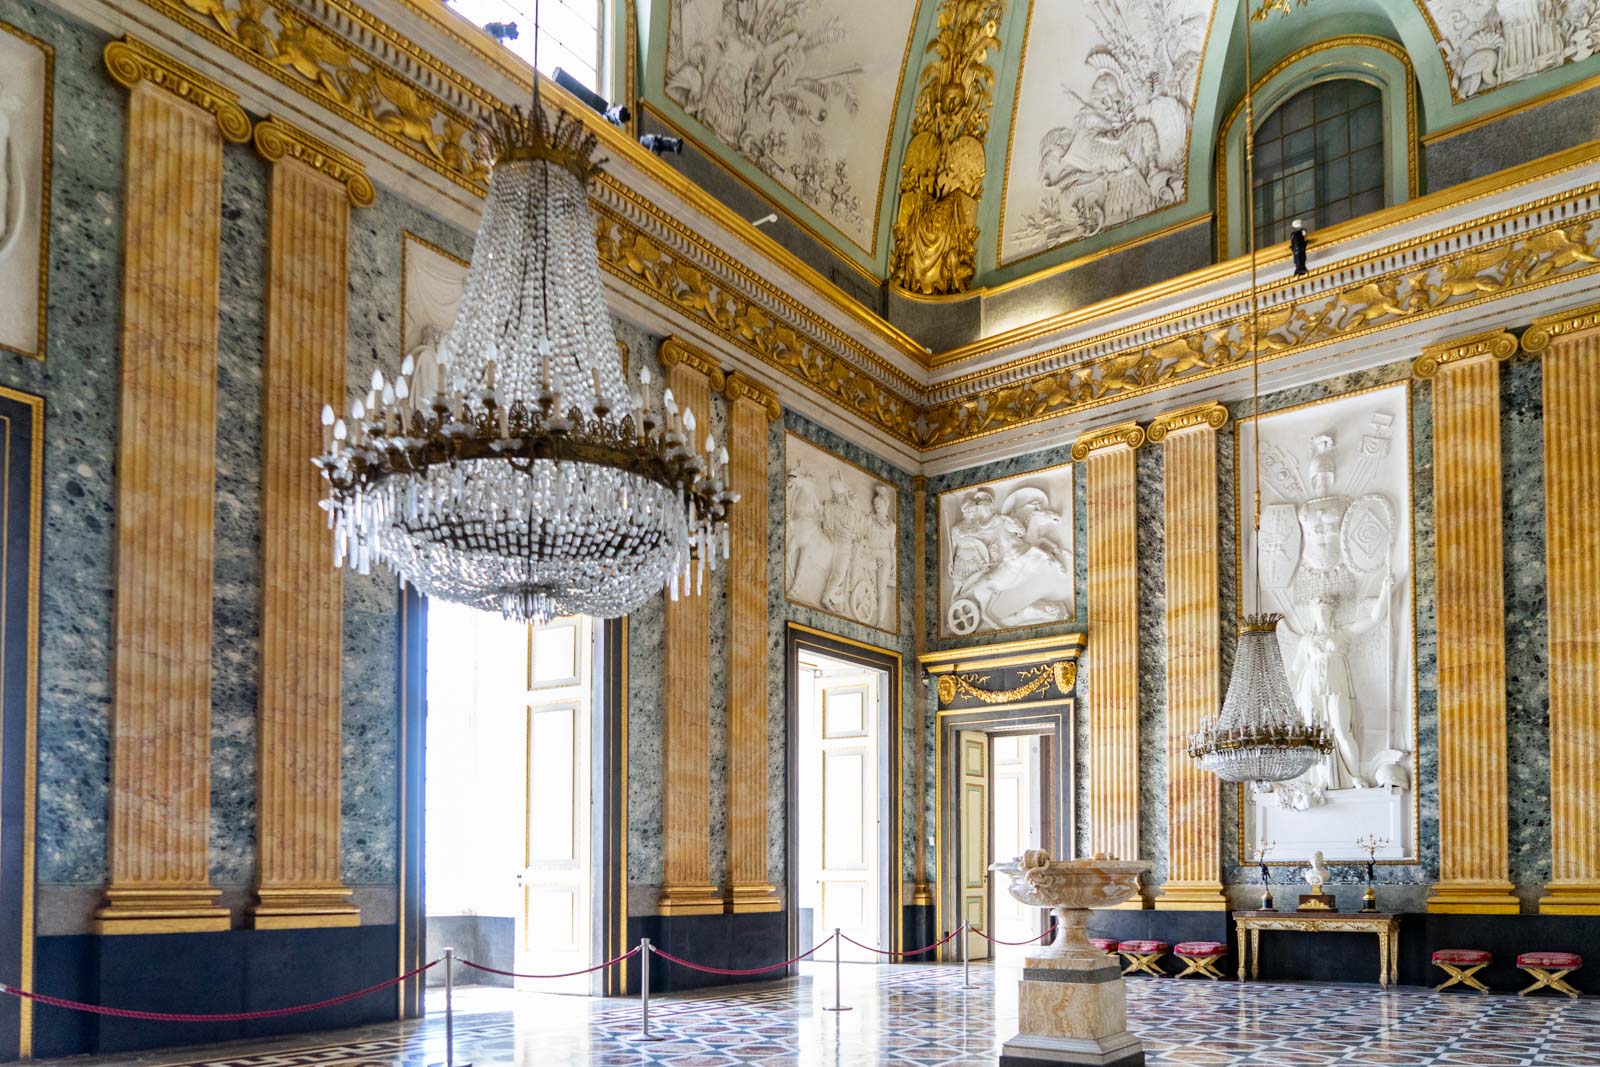 All You Need To Know About Visiting Caserta Palace From Naples